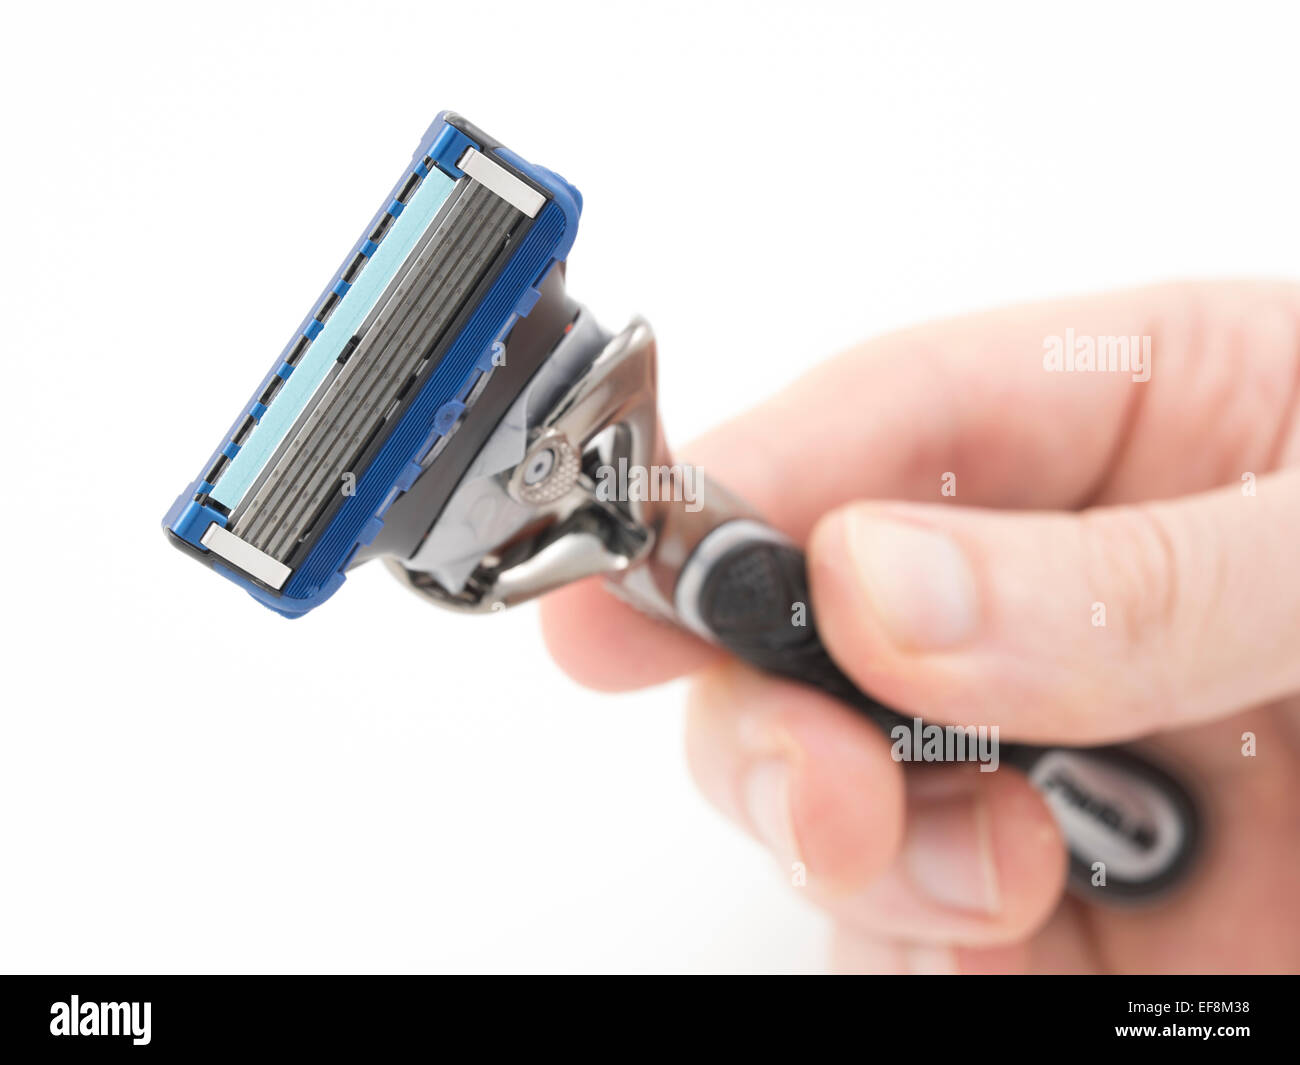 Gillette Fusion Proglide Disposable Razor with Flexball for shaving / male grooming Stock Photo